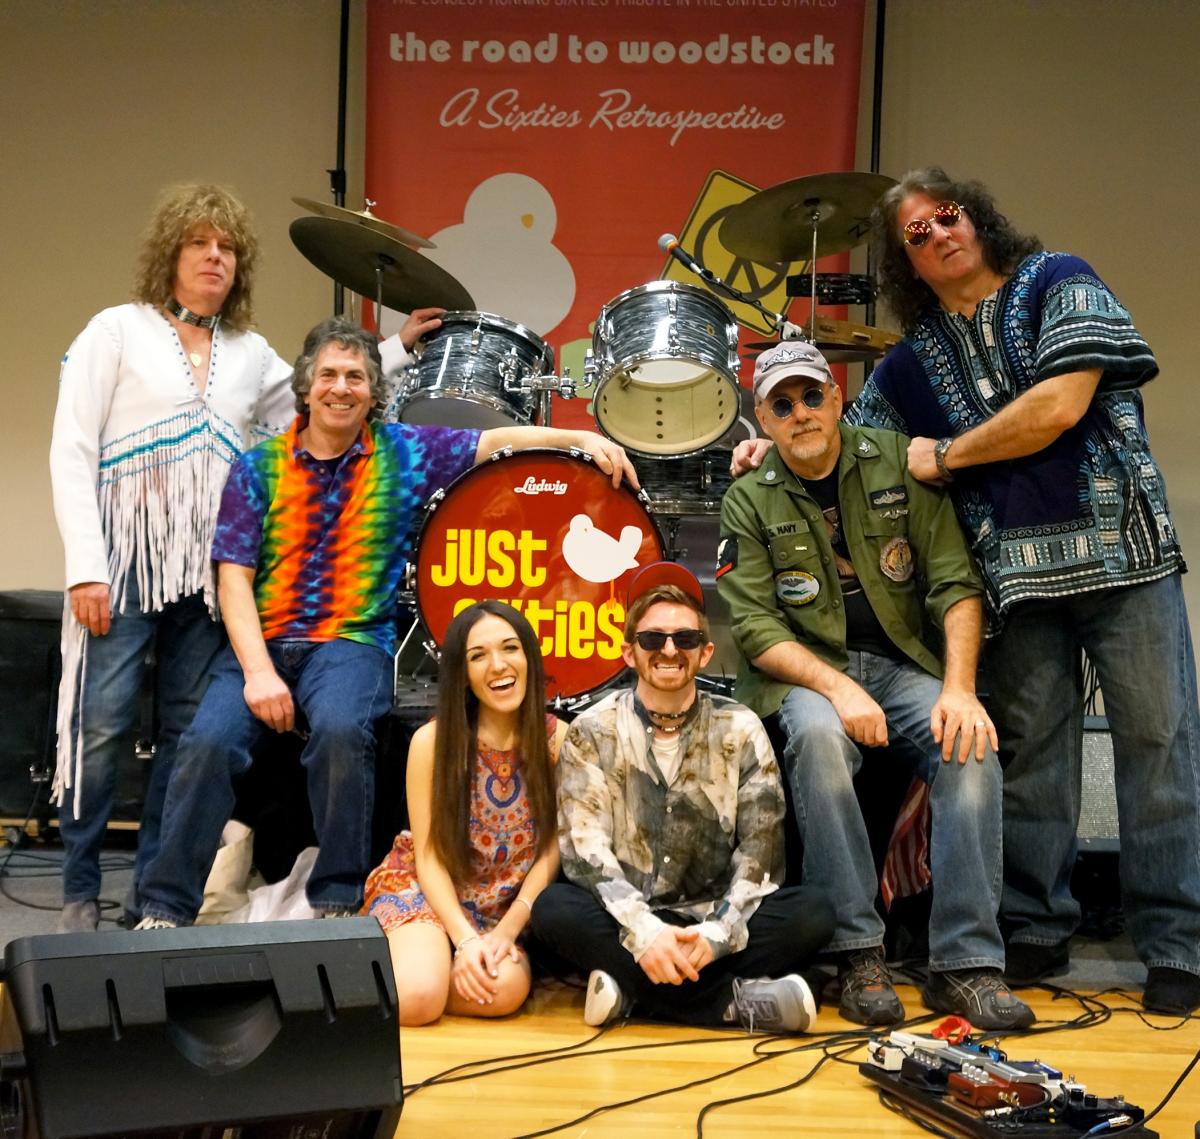 A color photo of the six members of the Just Sixties tribute band dressed in sixties attire.